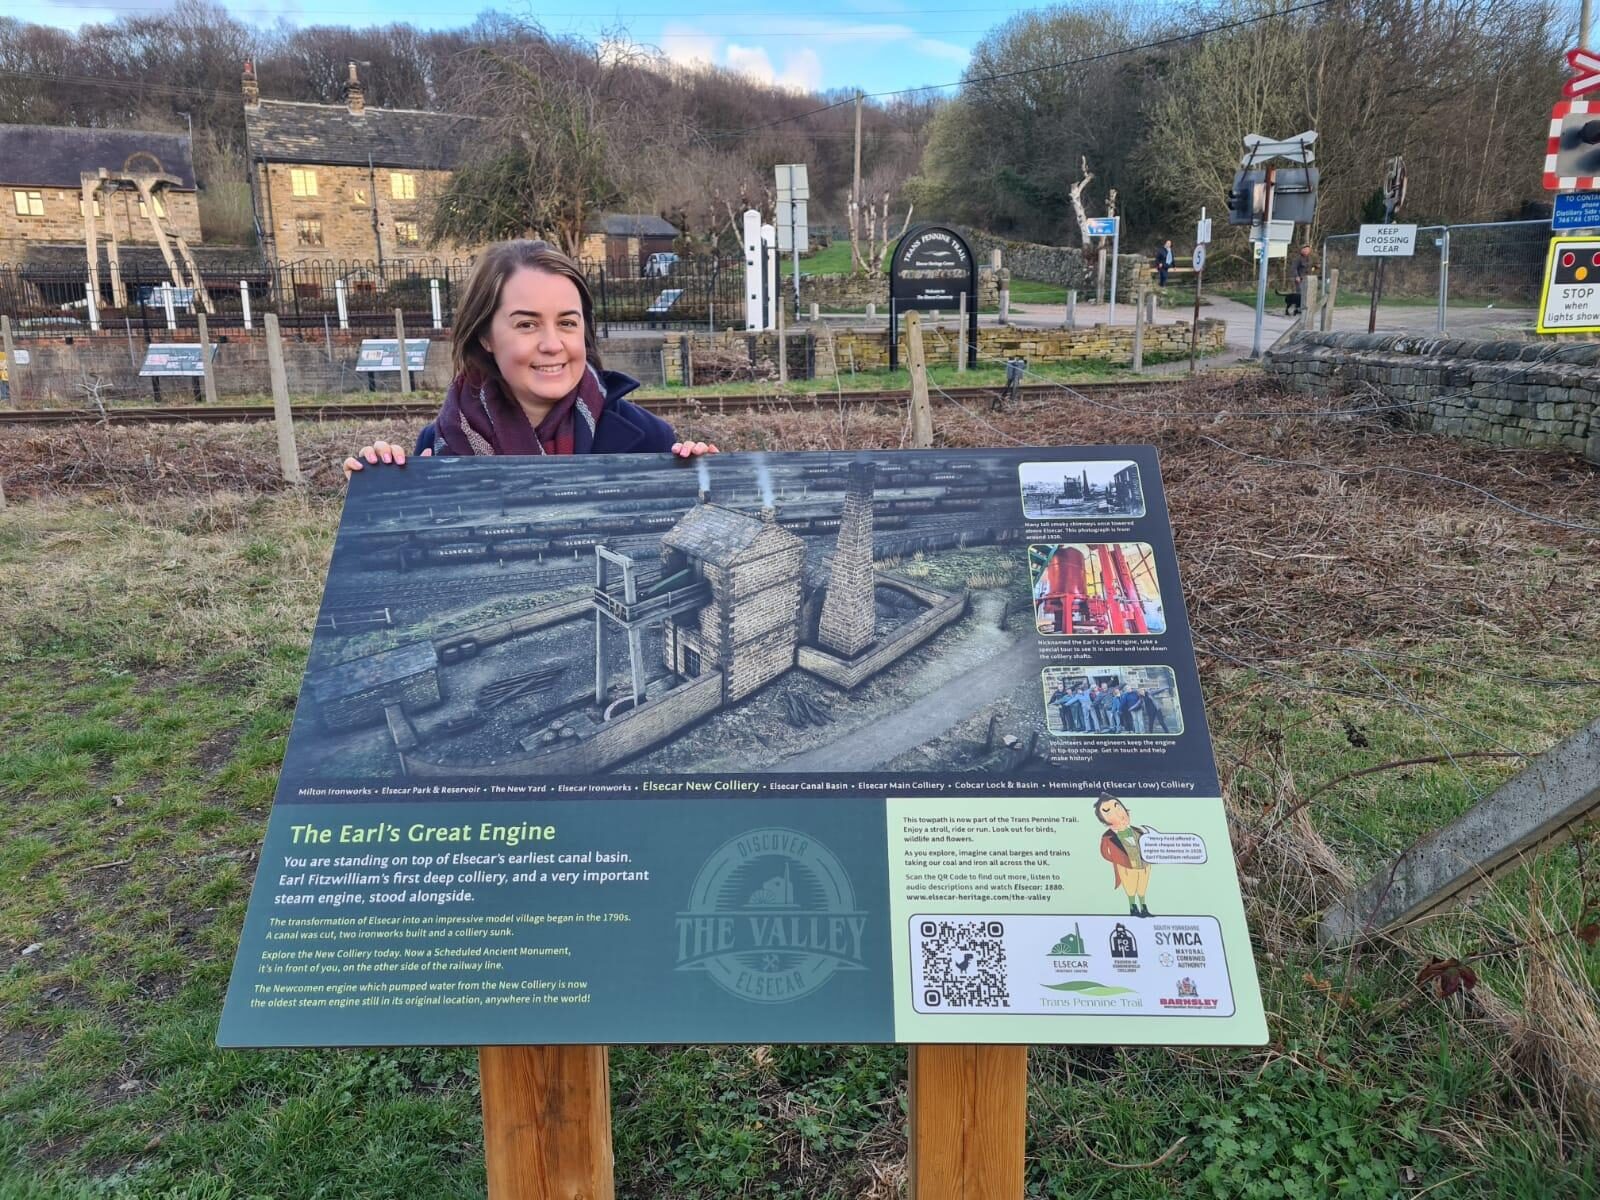 Stephanie Peacock MP visiting the new history boards at Elsecar Transpennine Trail